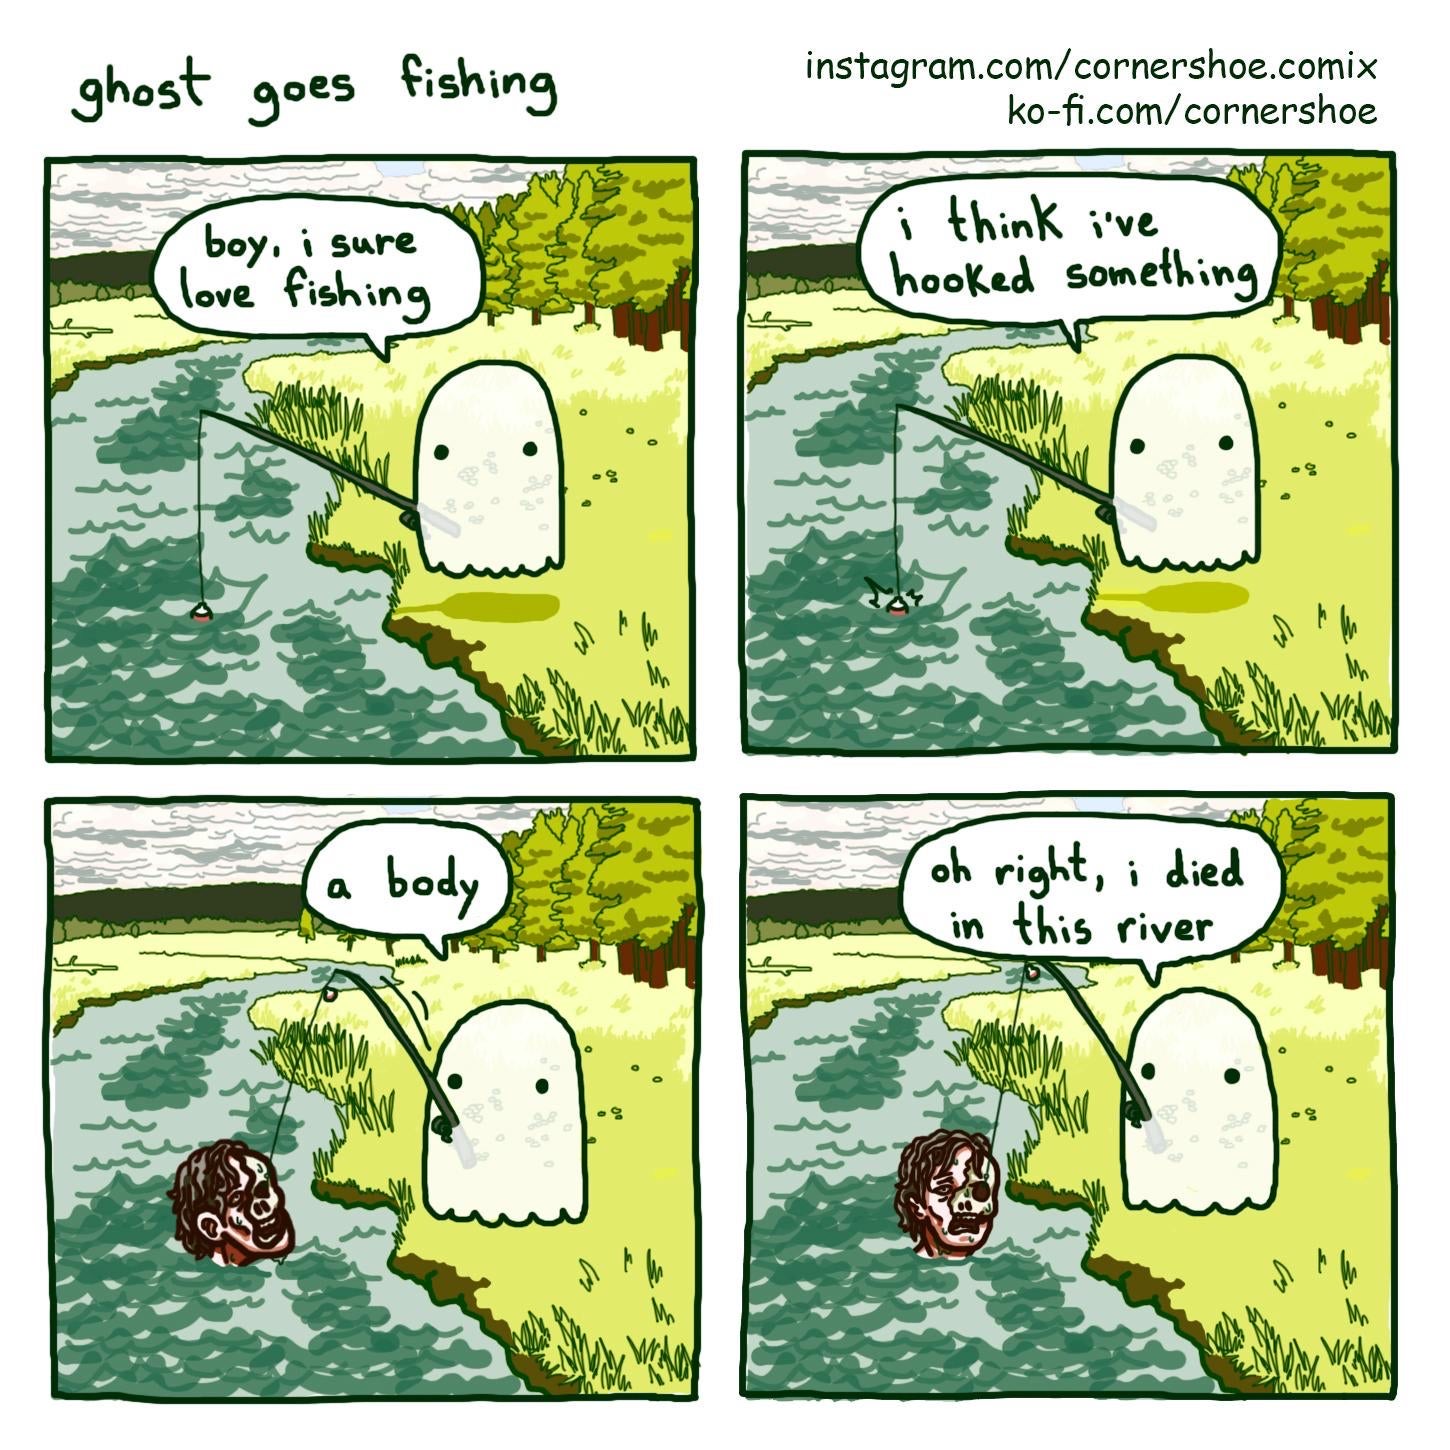 you have too many hobbies meme - ghost goes fishing instagram.comcornershoe.comix kofi.comcornershoe boy, i sure love fishing i think i've hooked something . a body oh right, i died in this river